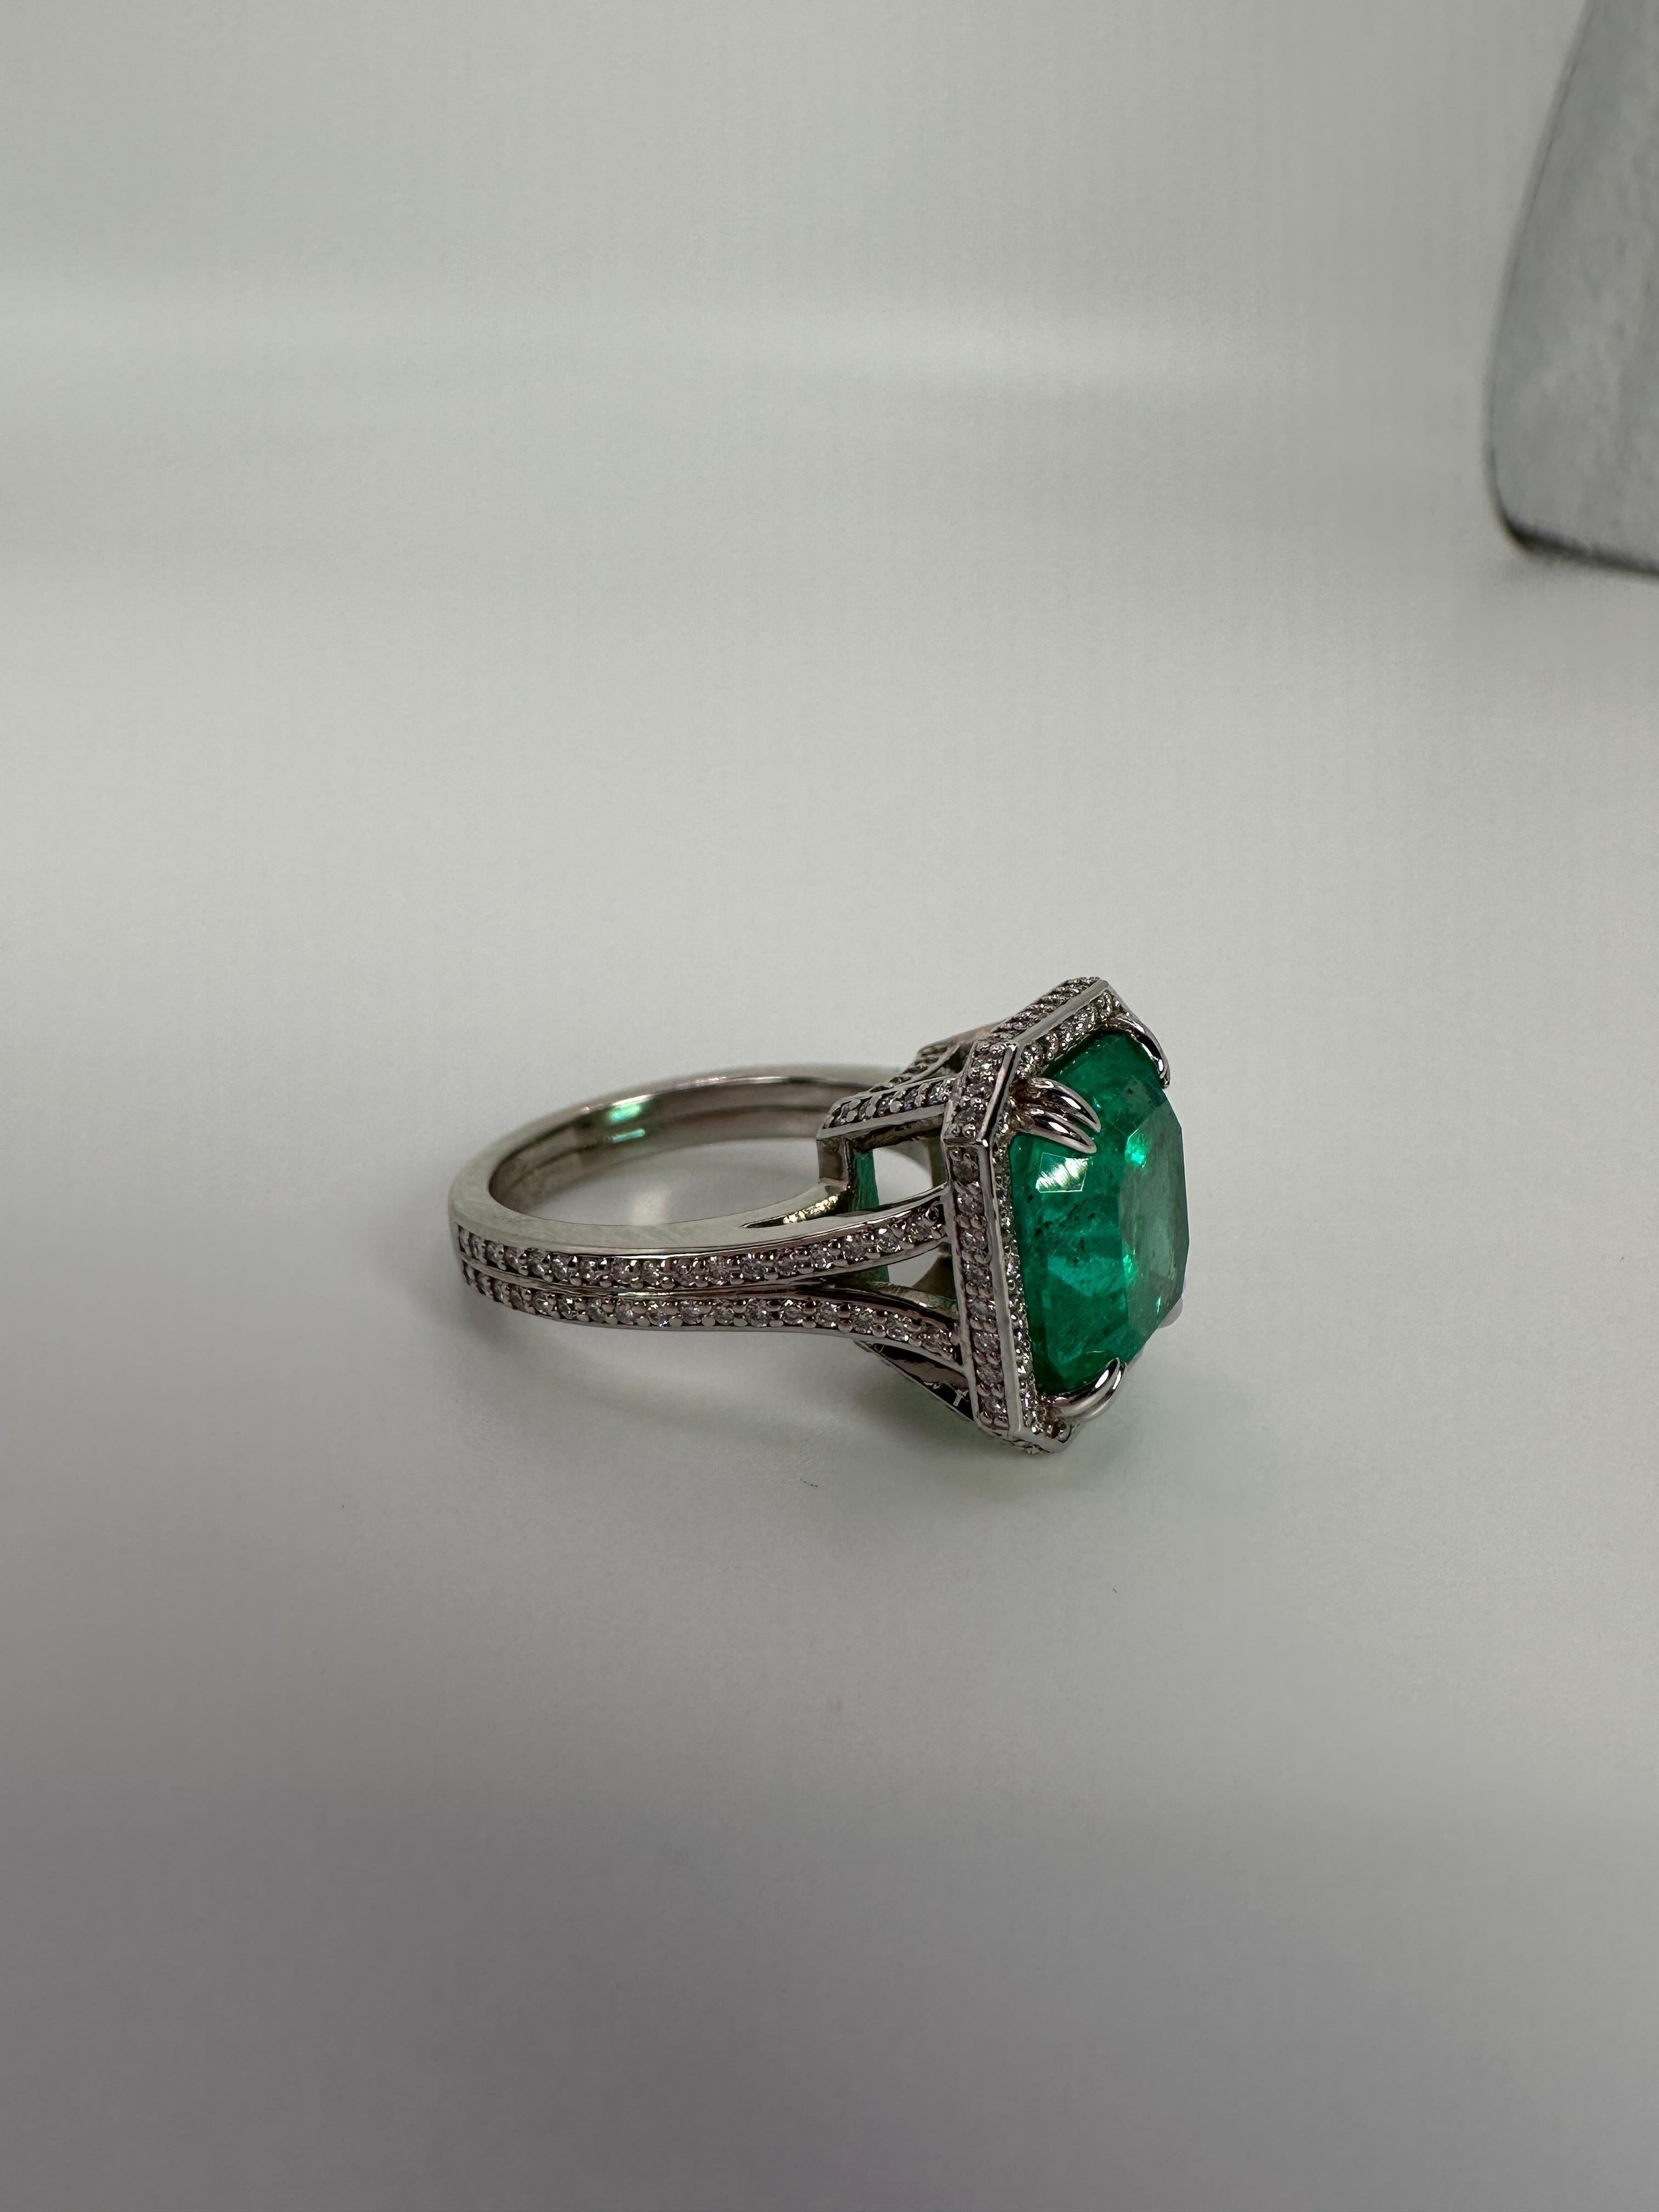 Stunning Colombian Emerald ring, certified by GIA a rare find! Luxurious cocktail ring for all occasions, custom made with modern classical design.

GRAM WEIGHT: 9gr
GOLD: 14KT white gold

NATURAL DIAMOND(S)
Cut: Round Brilliant
Color: G-H 
Clarity: